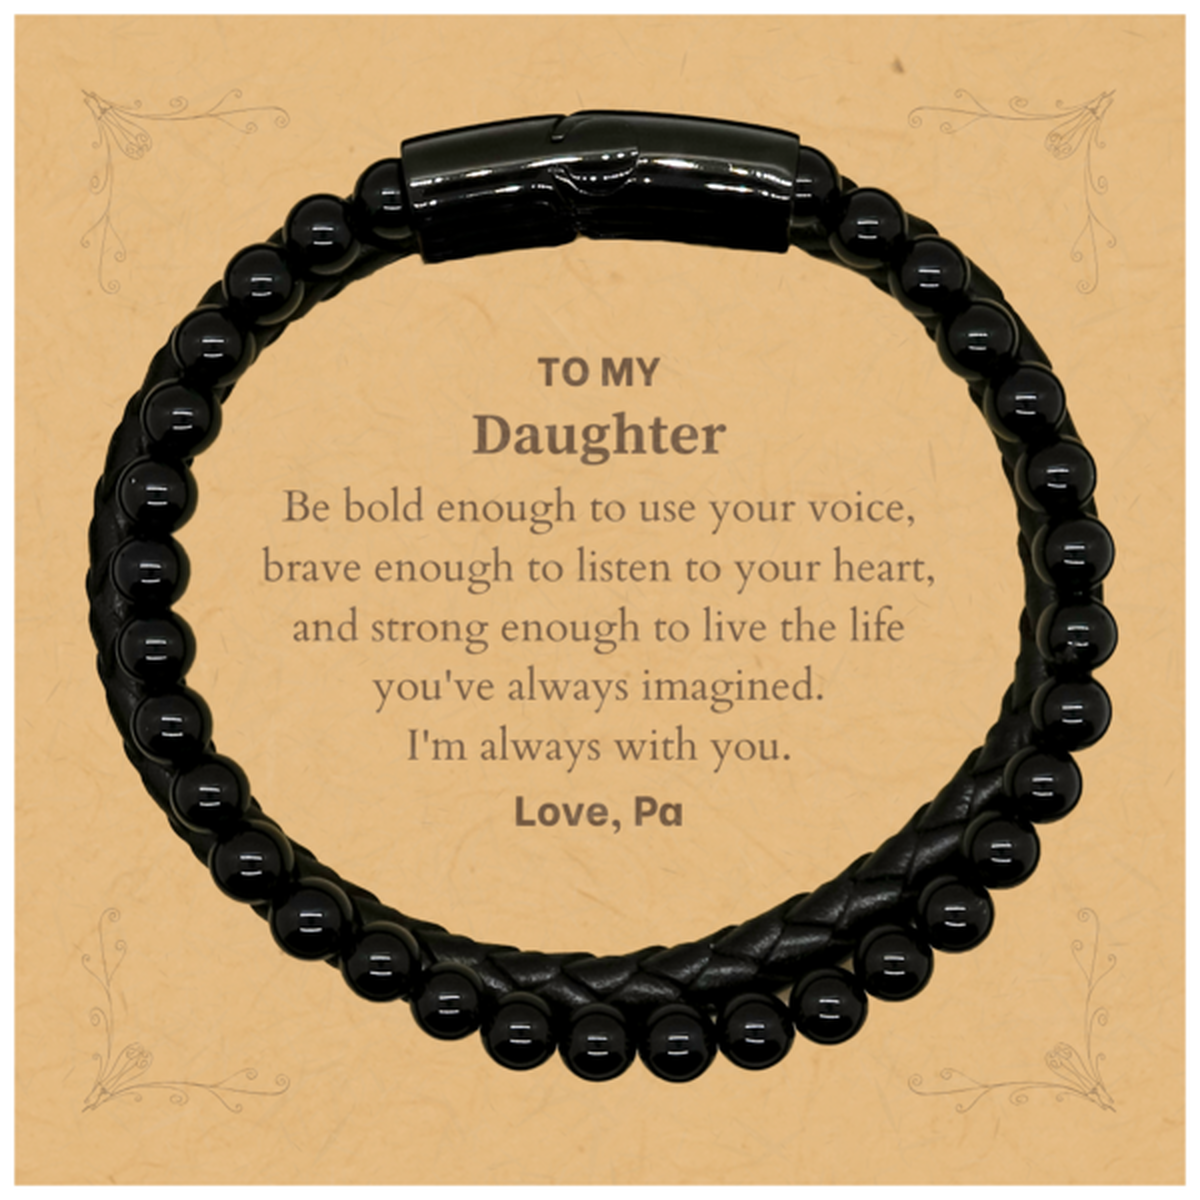 Keepsake Daughter Stone Leather Bracelets Gift Idea Graduation Christmas Birthday Daughter from Pa, Daughter Be bold enough to use your voice, brave enough to listen to your heart. Love, Pa